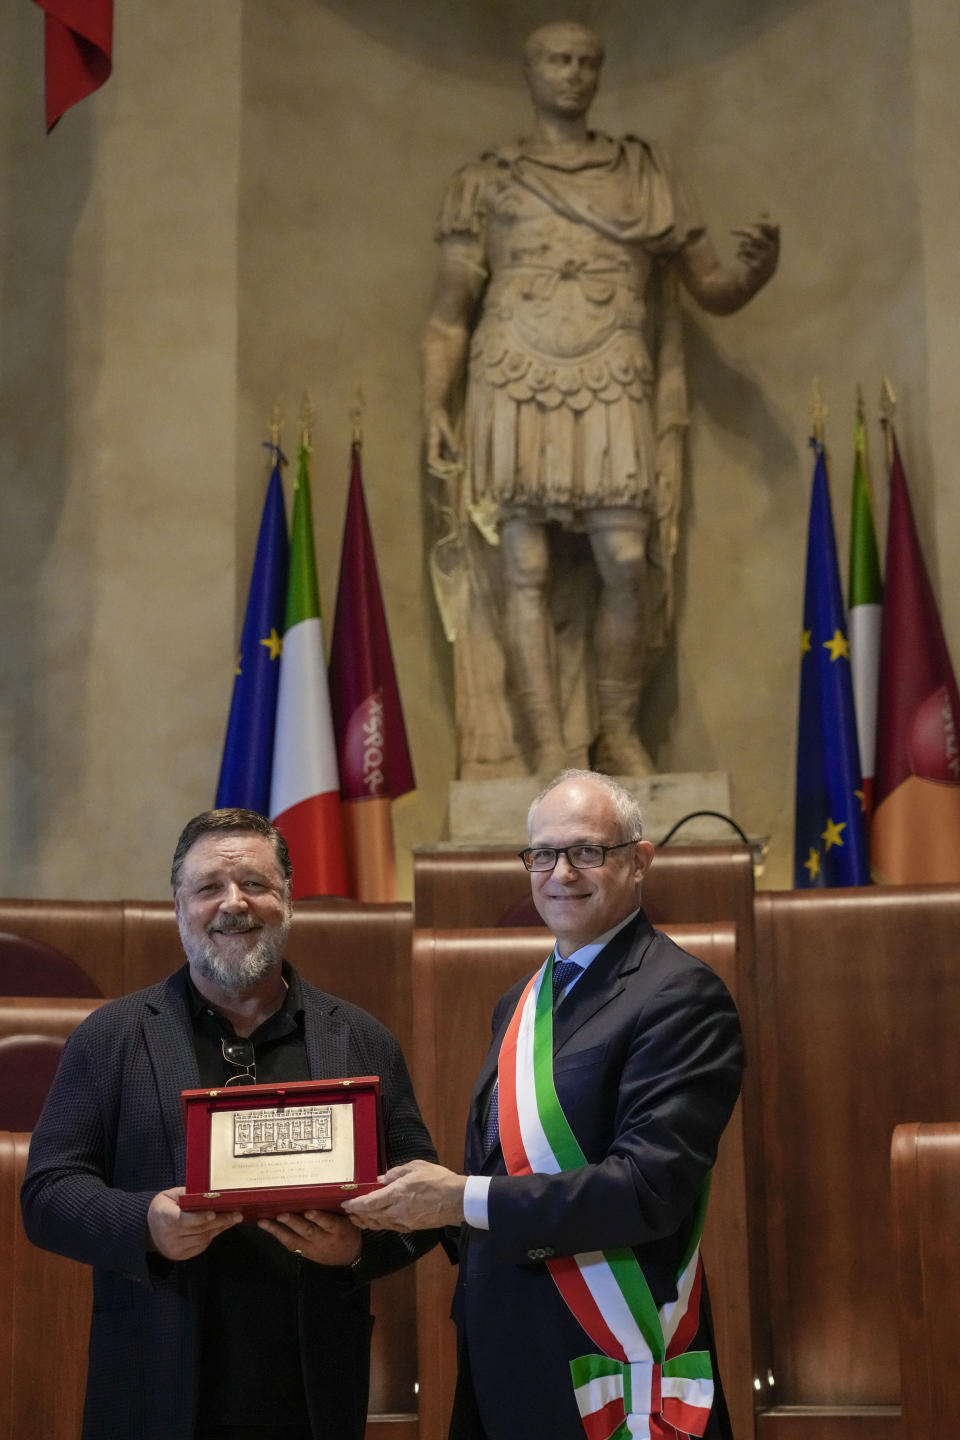 Actor Russel Crowe, left, poses under a statue of ancient Roman emperor Julius Cesar with the "Ambassador of Rome in the World" award he received from Rome's mayor Roberto Gualtieri, in Rome's Capitol Hill, Friday, Oct. 14, 2022. (AP Photo/Andrew Medichini)